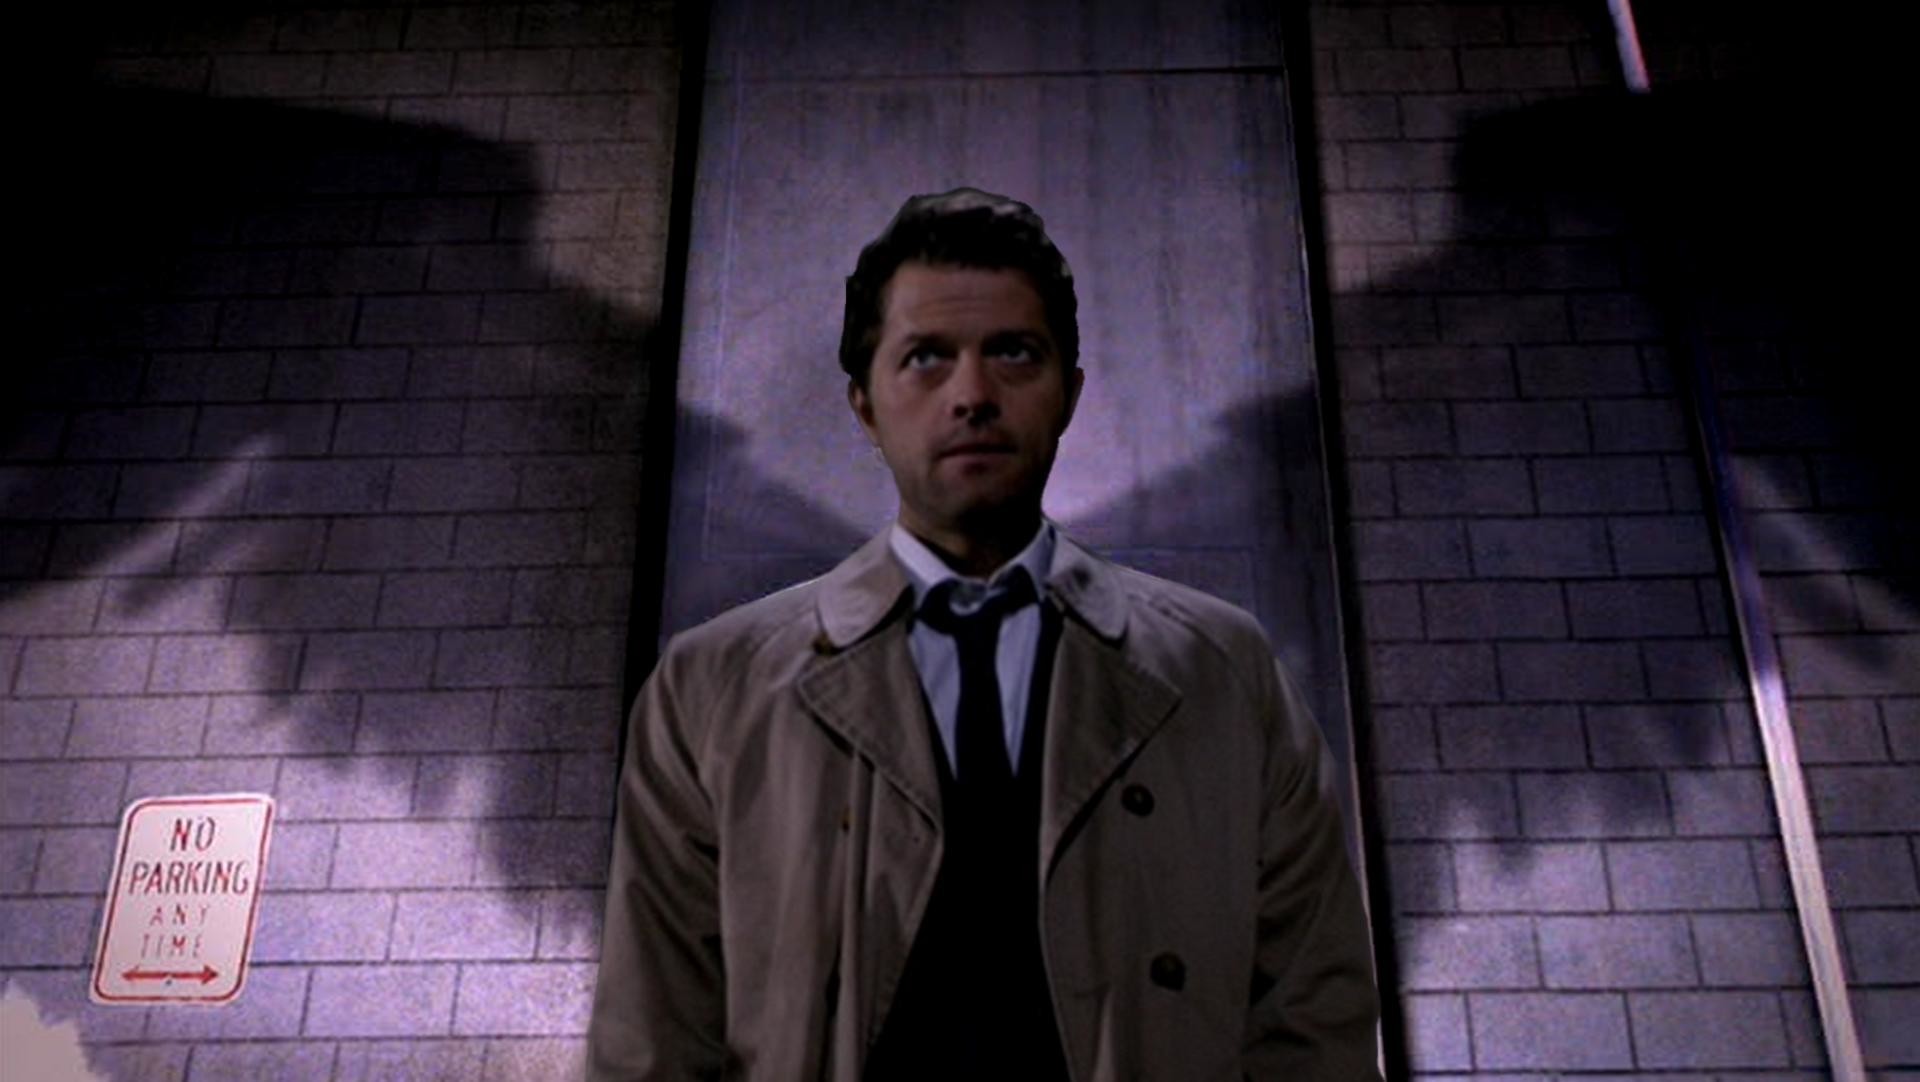 1920x1082 First attempt Castiel 1920x1080 cross post from /r/wallpapers/ ...